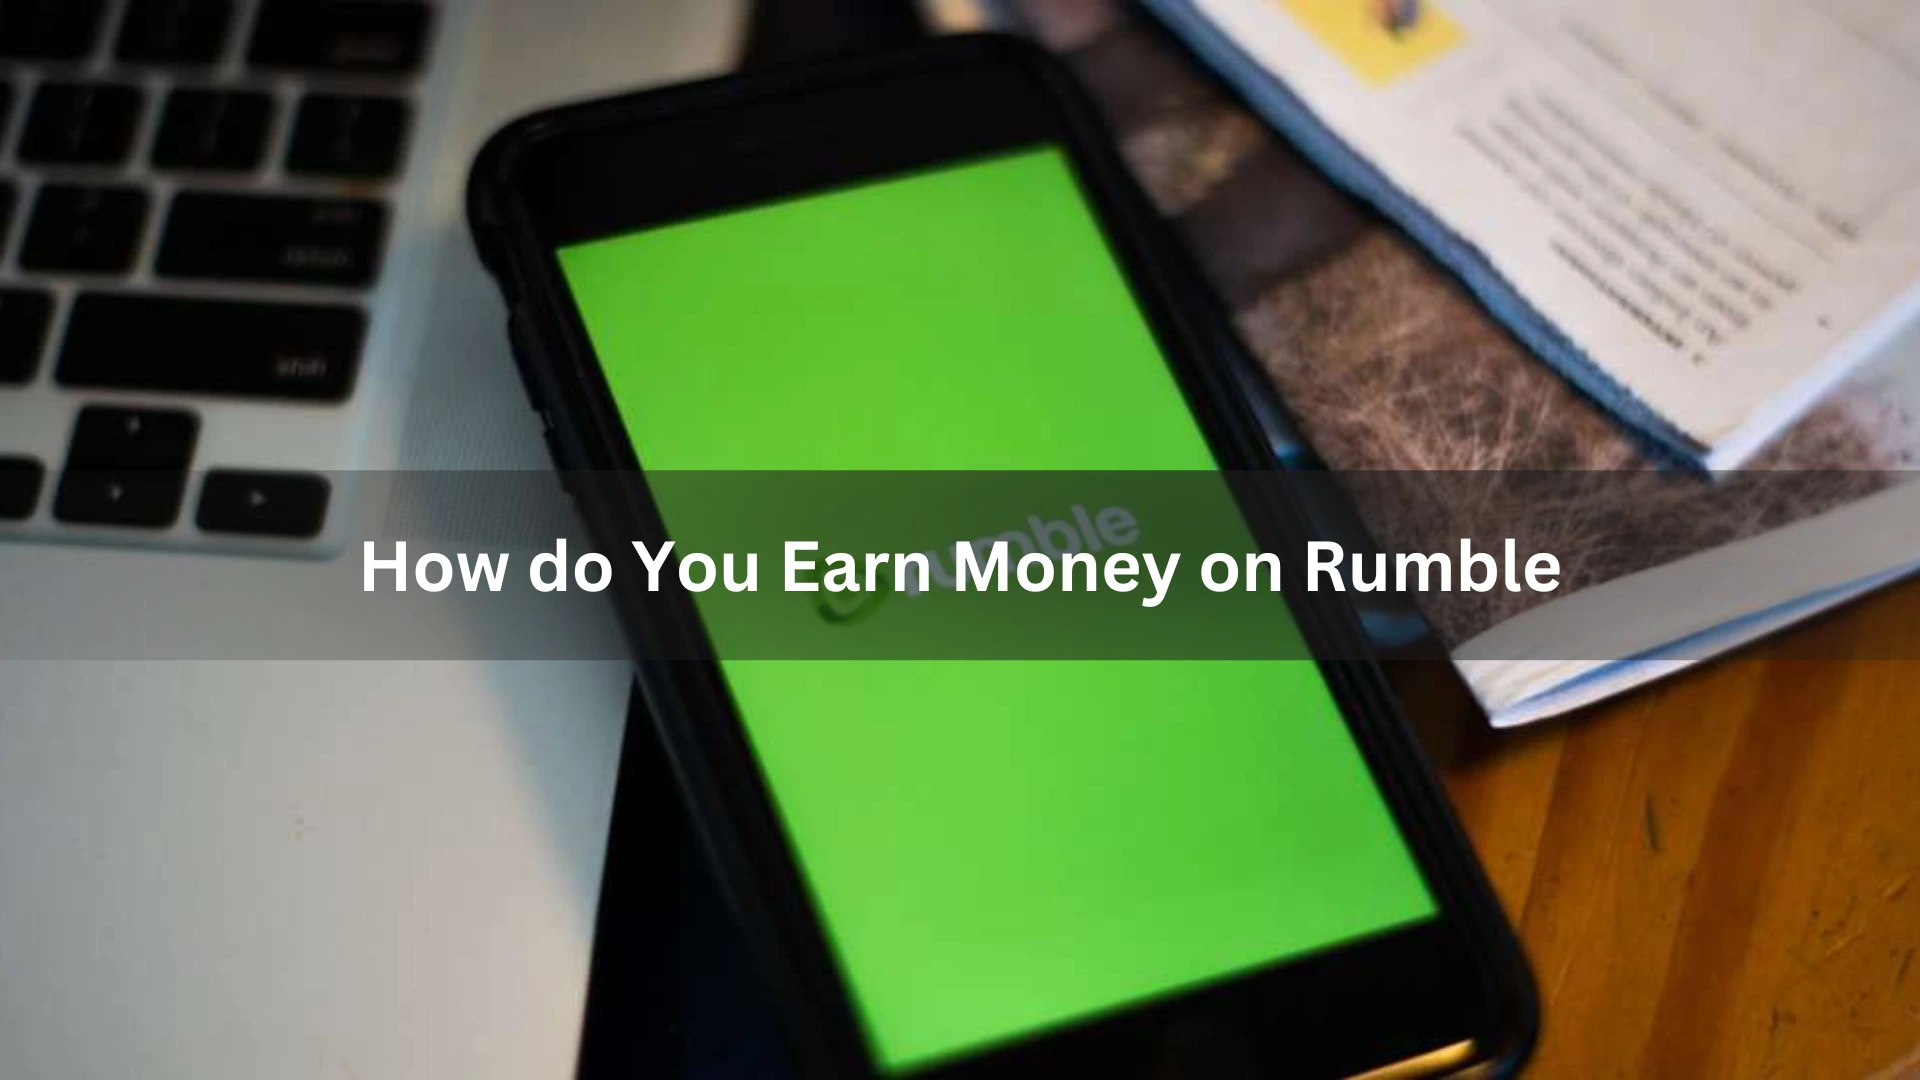 How to Earn Money on Rumble